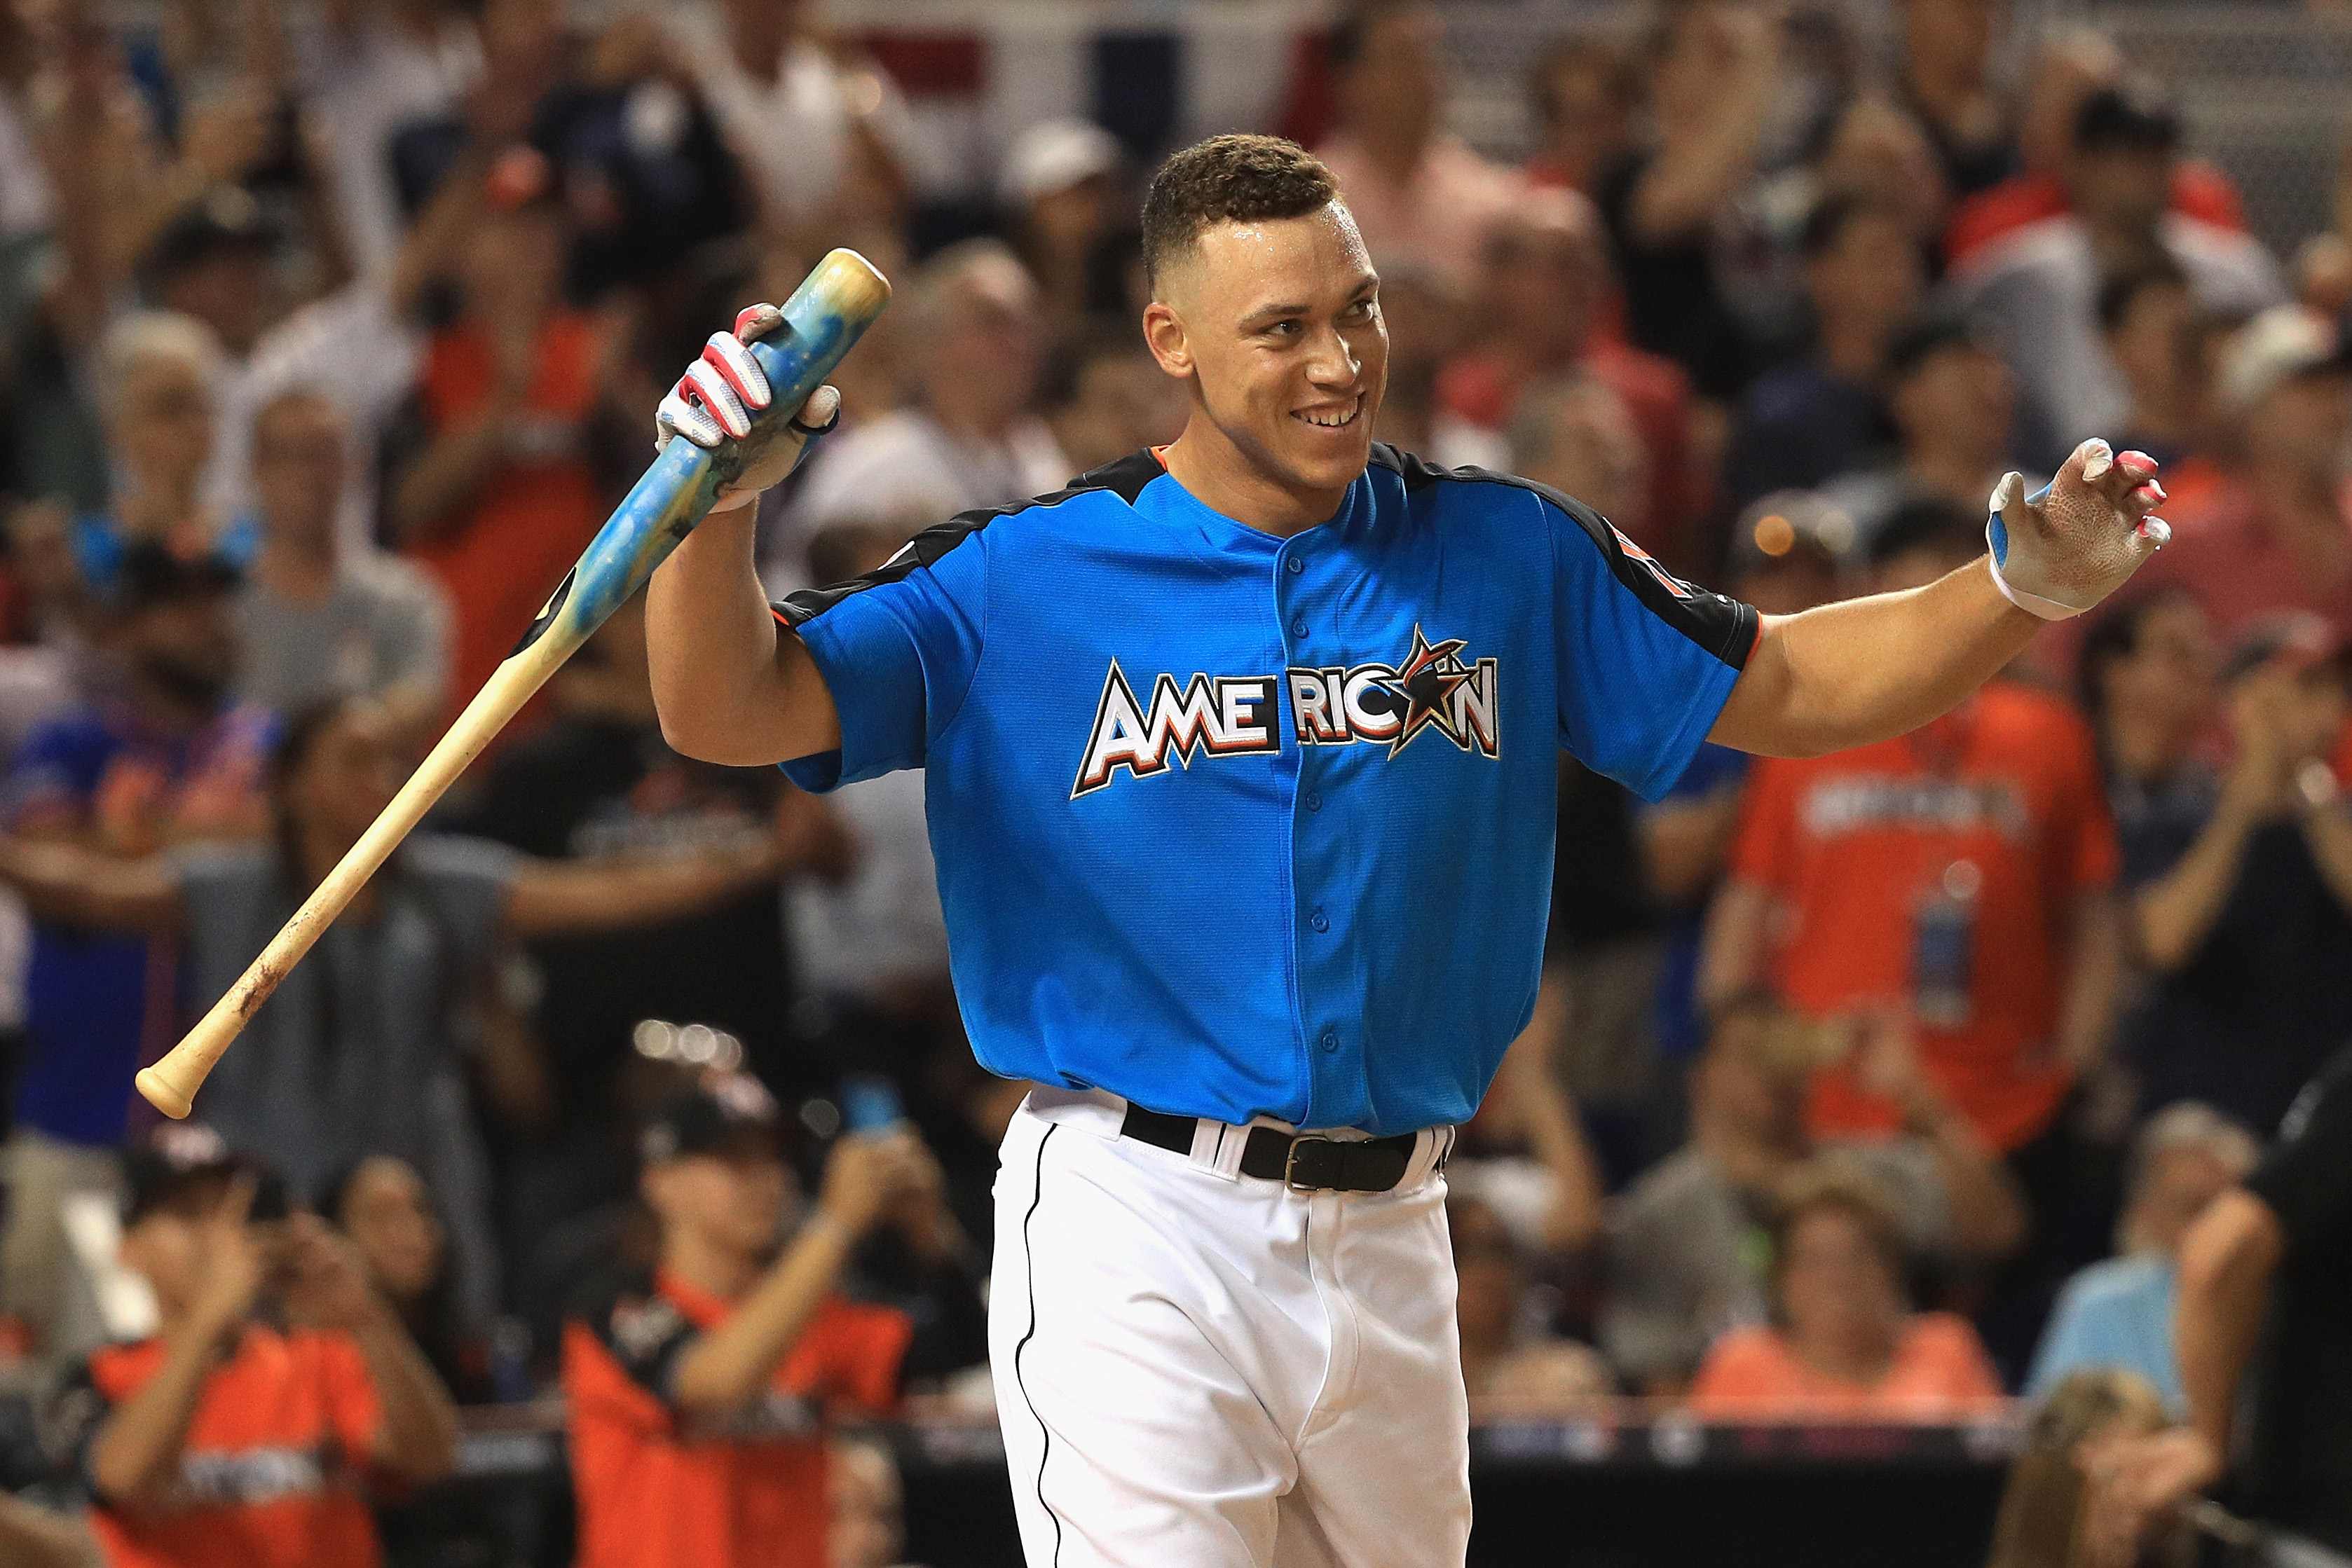 MIAMI, FL - JULY 10: Aaron Judge #99 of the New York Yankees celebrates after winning the T-Mobile Home Run Derby at Marlins Park on July 10, 2017 in Miami, Florida. (Photo by Mike Ehrmann/Getty Images)